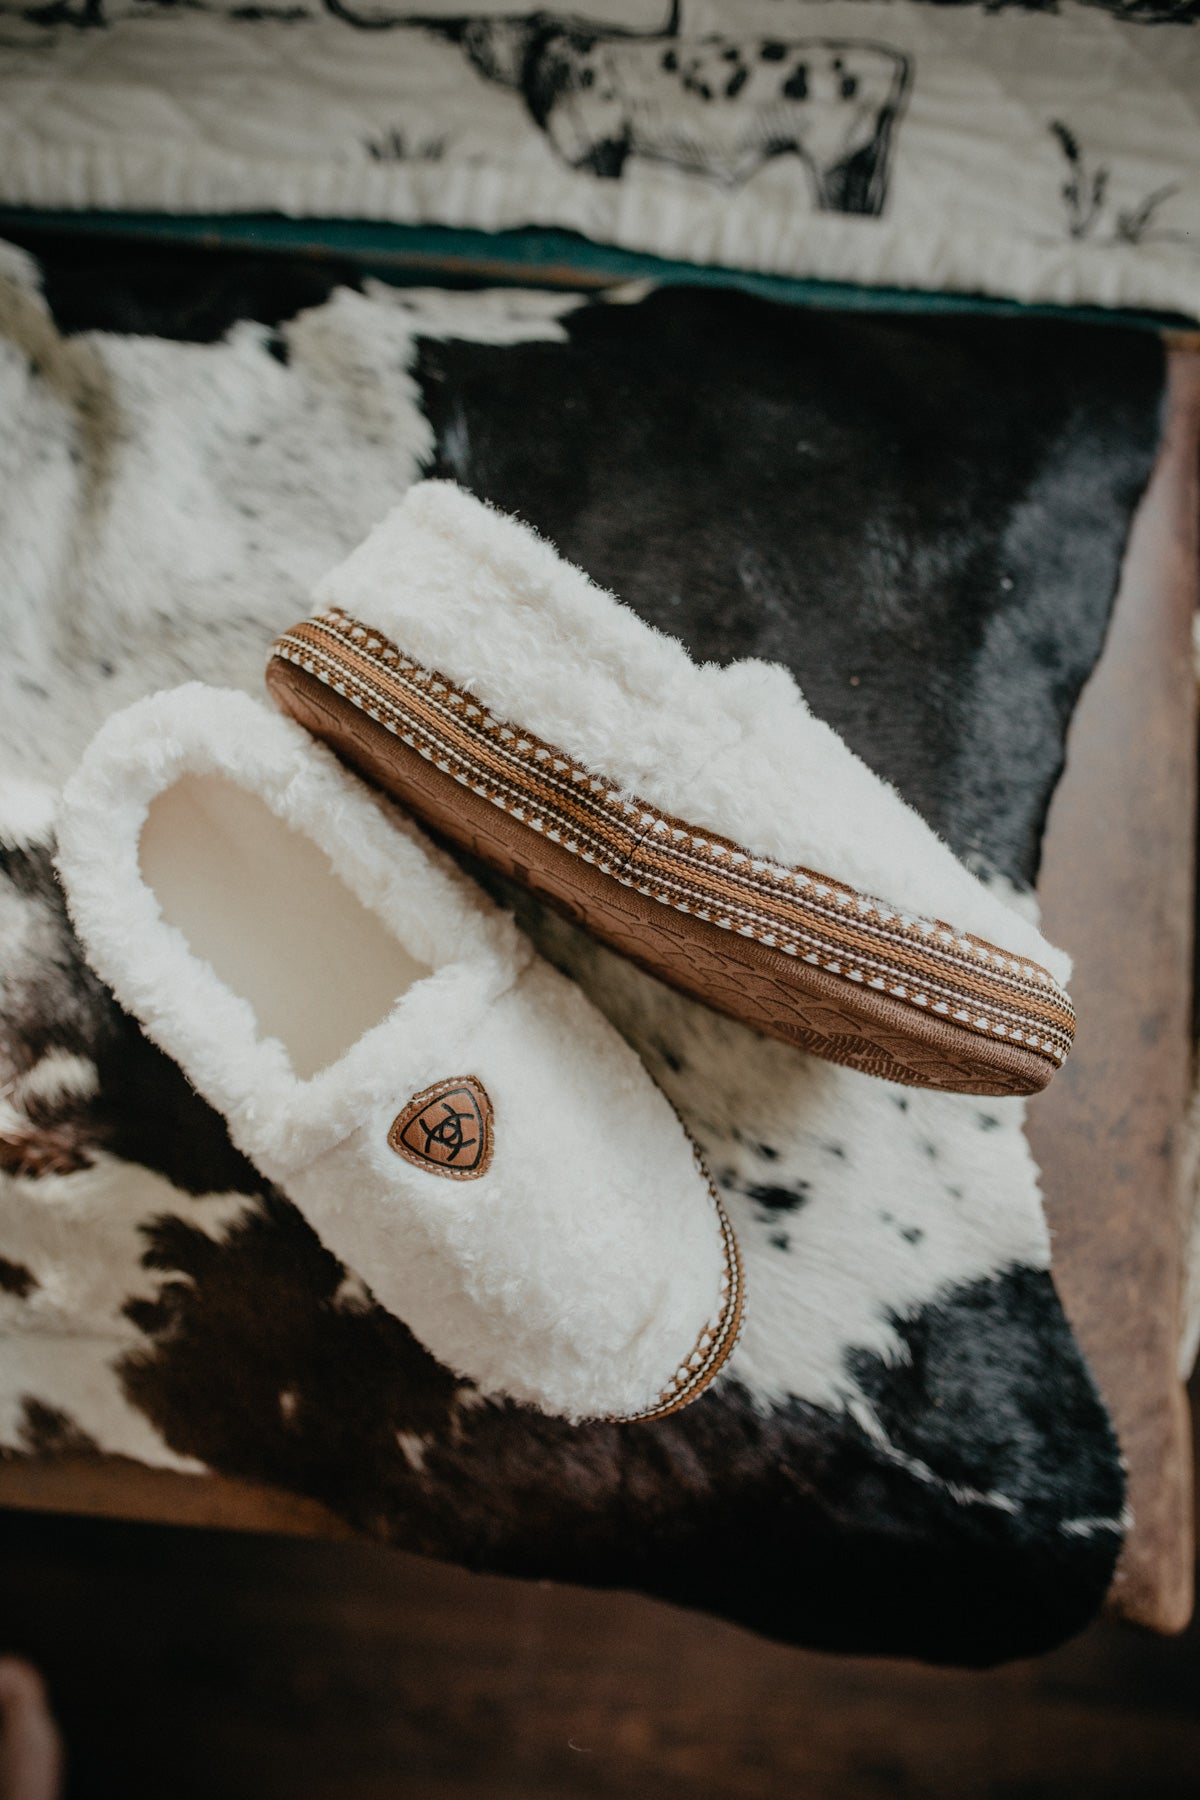 Women's Ariat "Snuggle" Slippers (XS 5-6 Only)